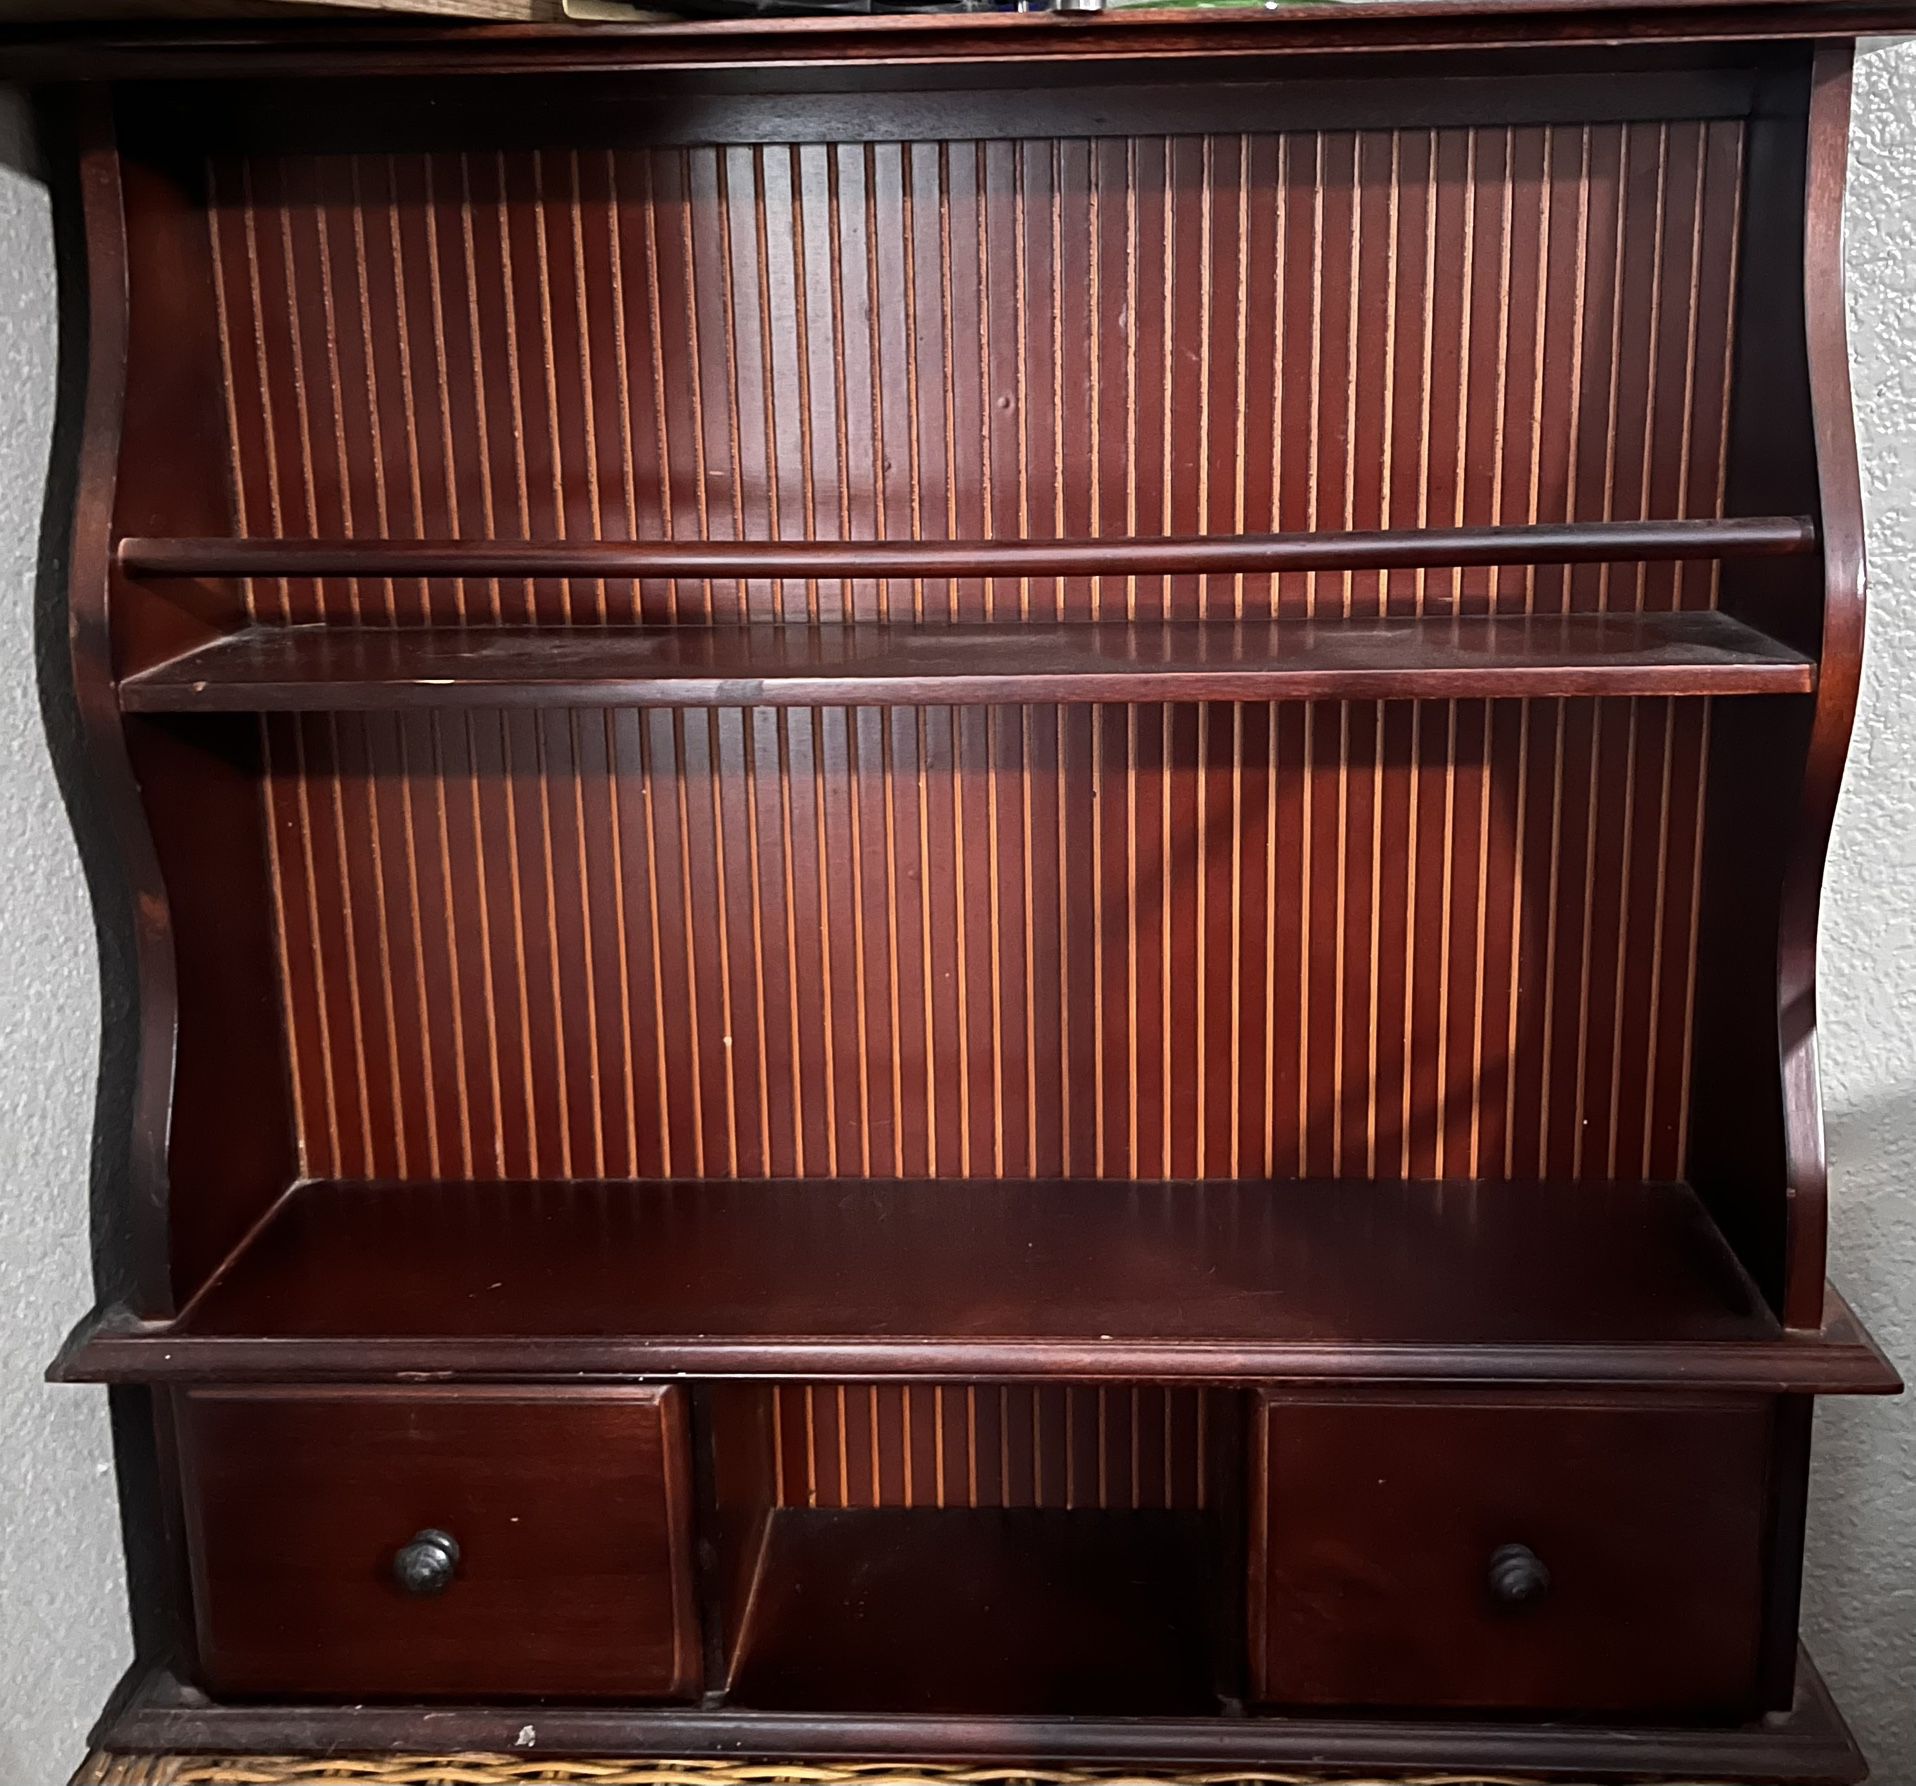 Organizer With Drawers